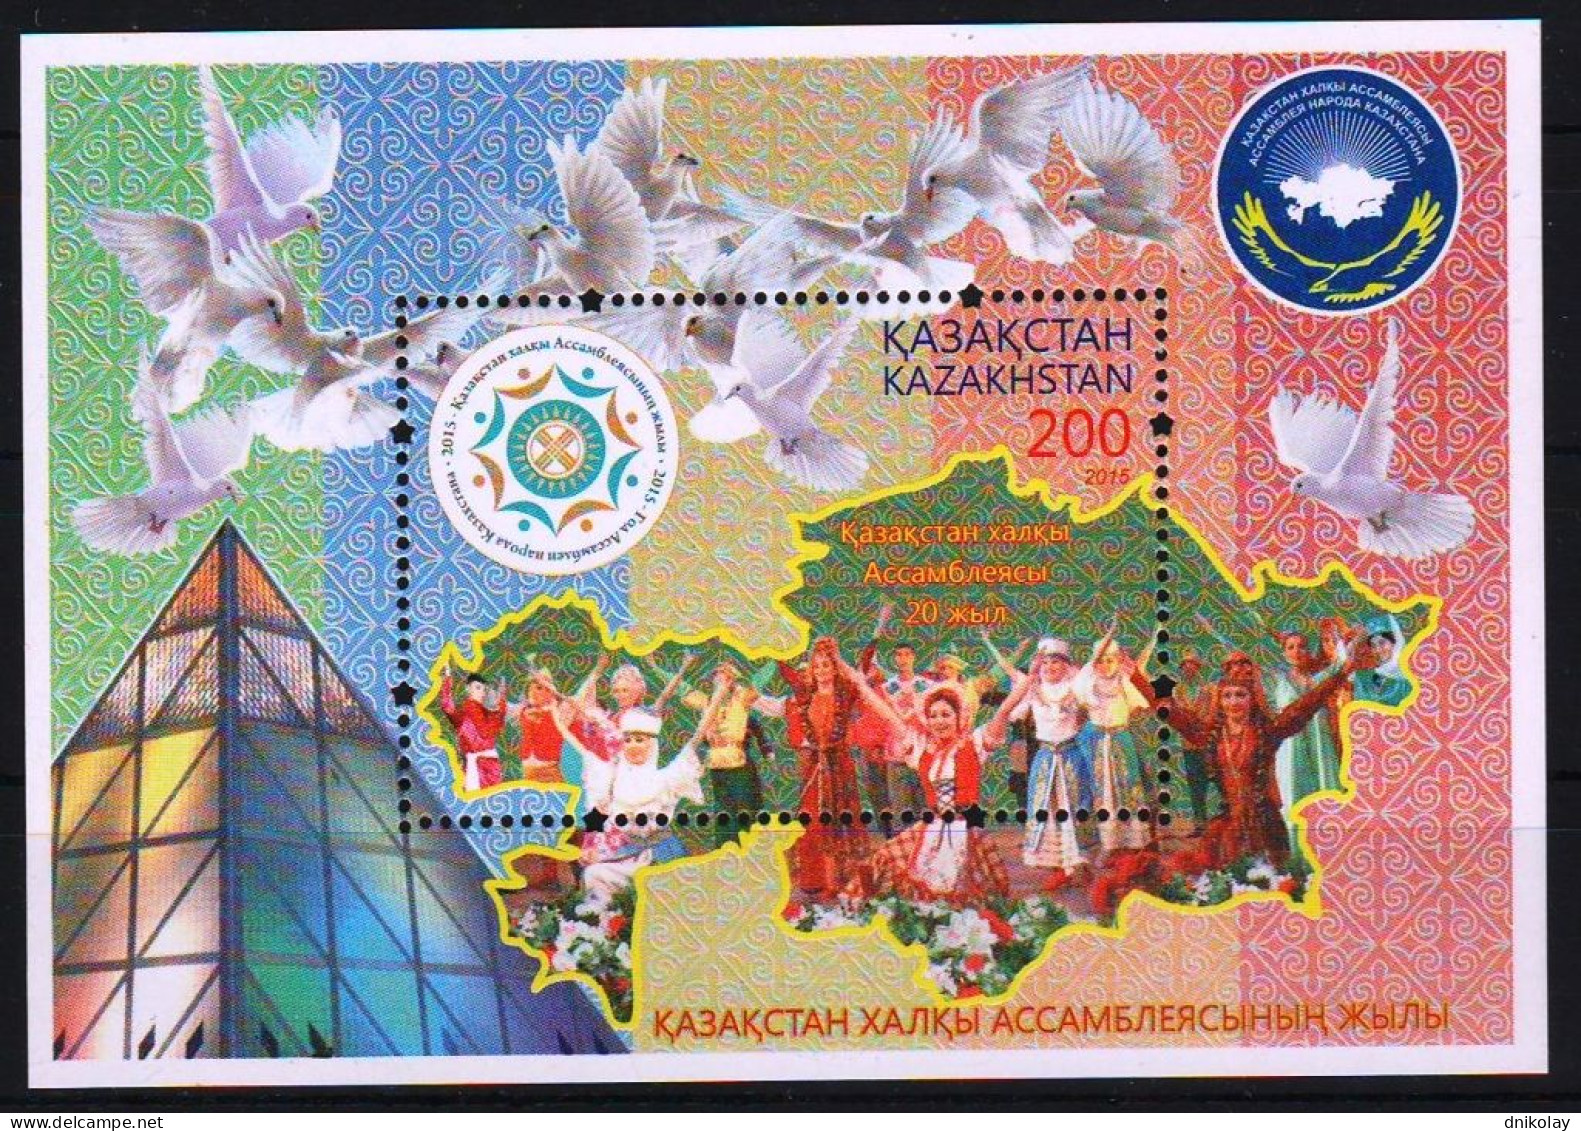 2015 902 Kazakhstan The 20th Anniversary Of The Assembly Of The People Of Kazakhstan MNH - Kazakhstan